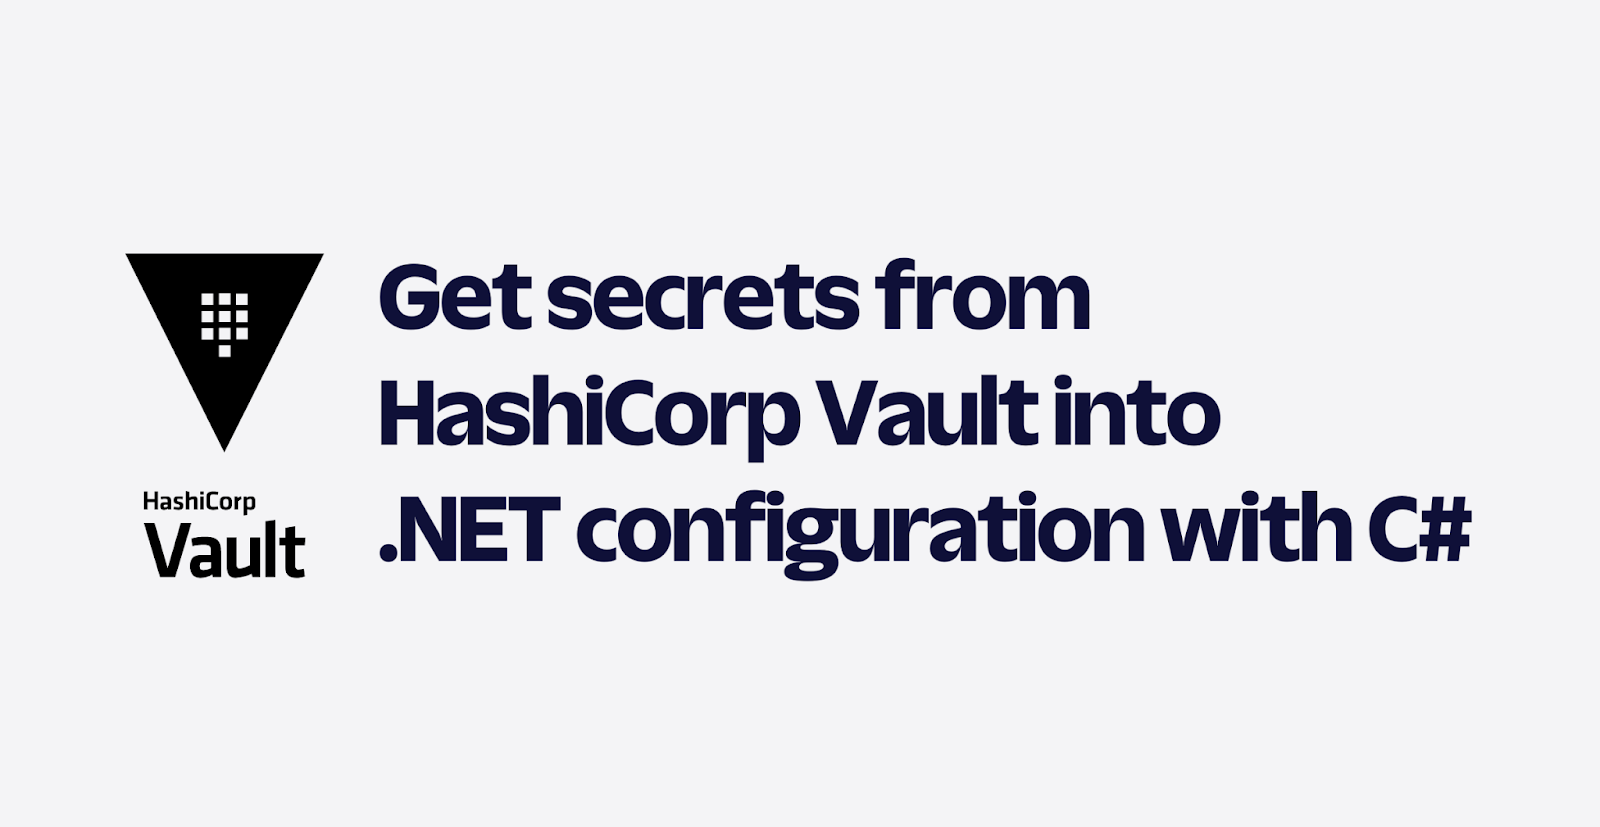 Get secrets from HashiCorp Vault into .NET configuration with C#